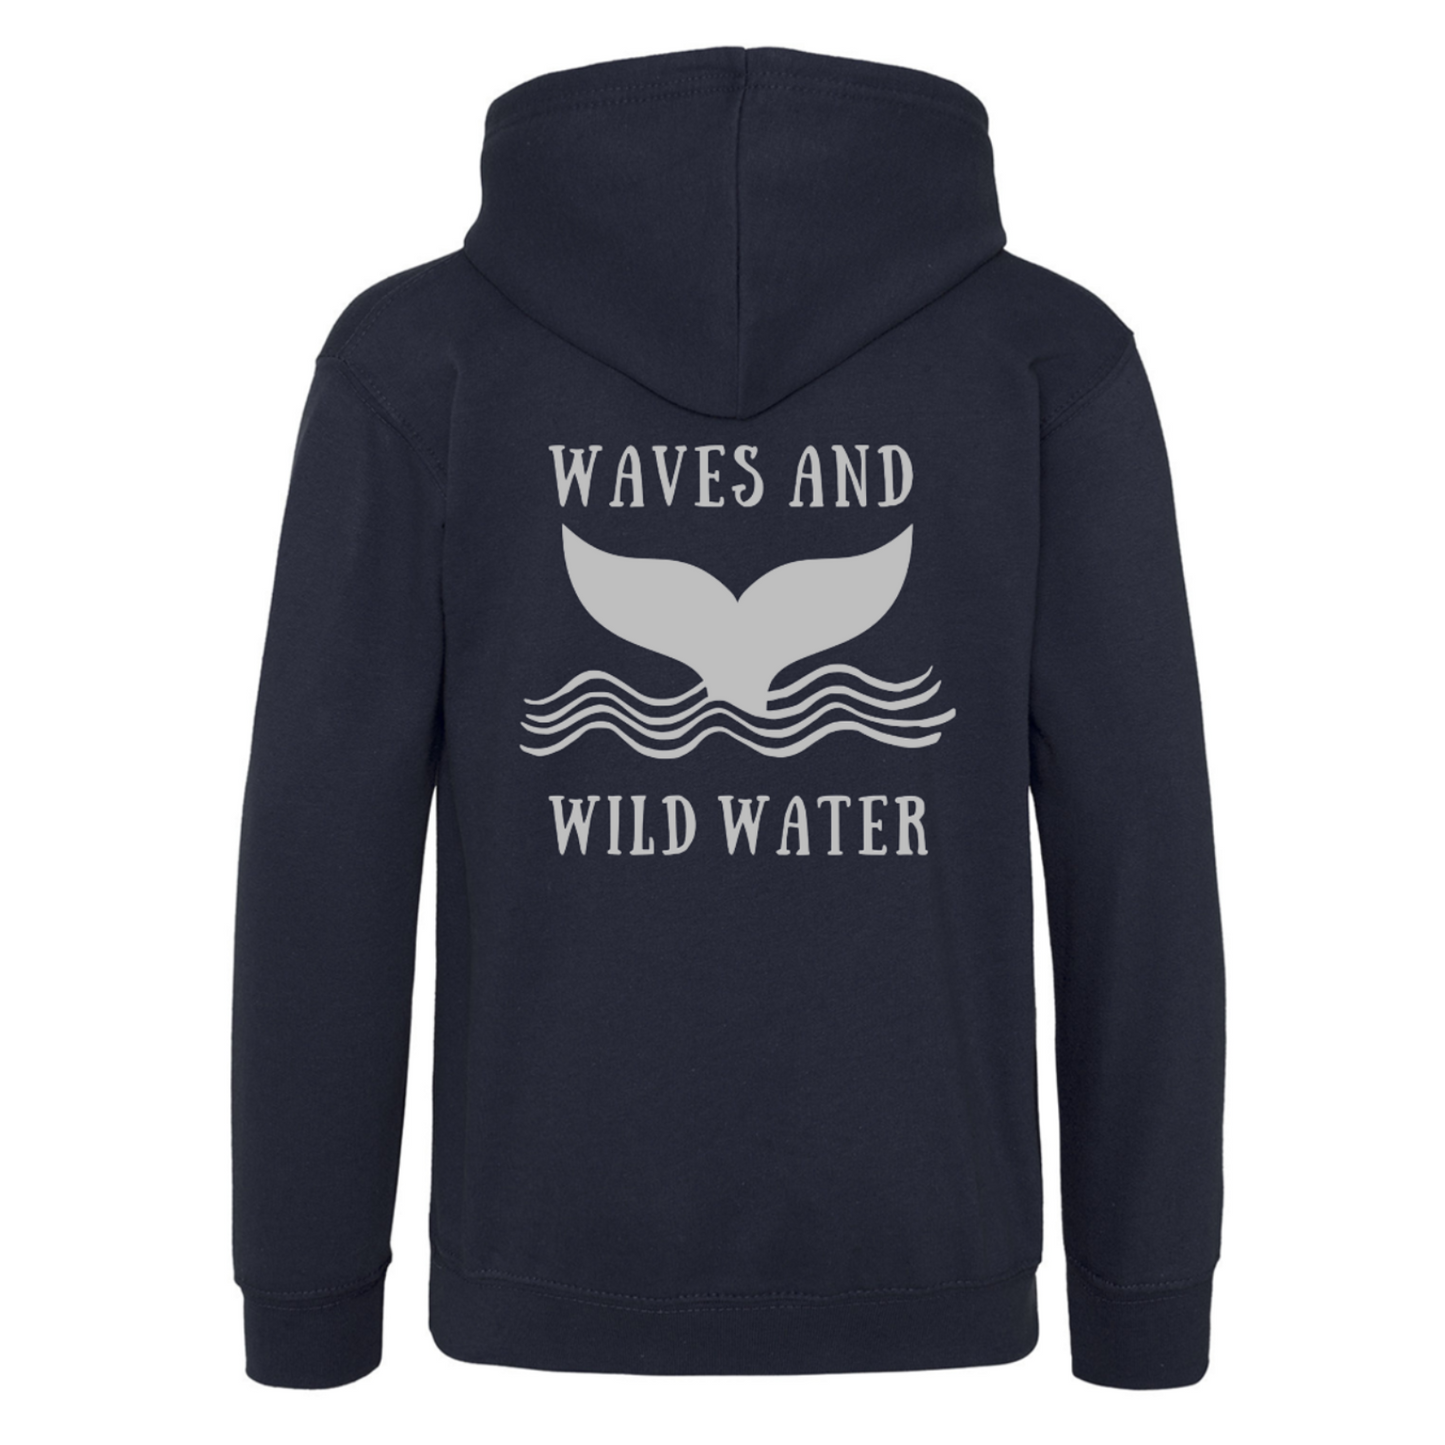 A navy blue hoodie with a metallic silver Waves & Wild Water logo, depicting a whale tail coming out of the water.